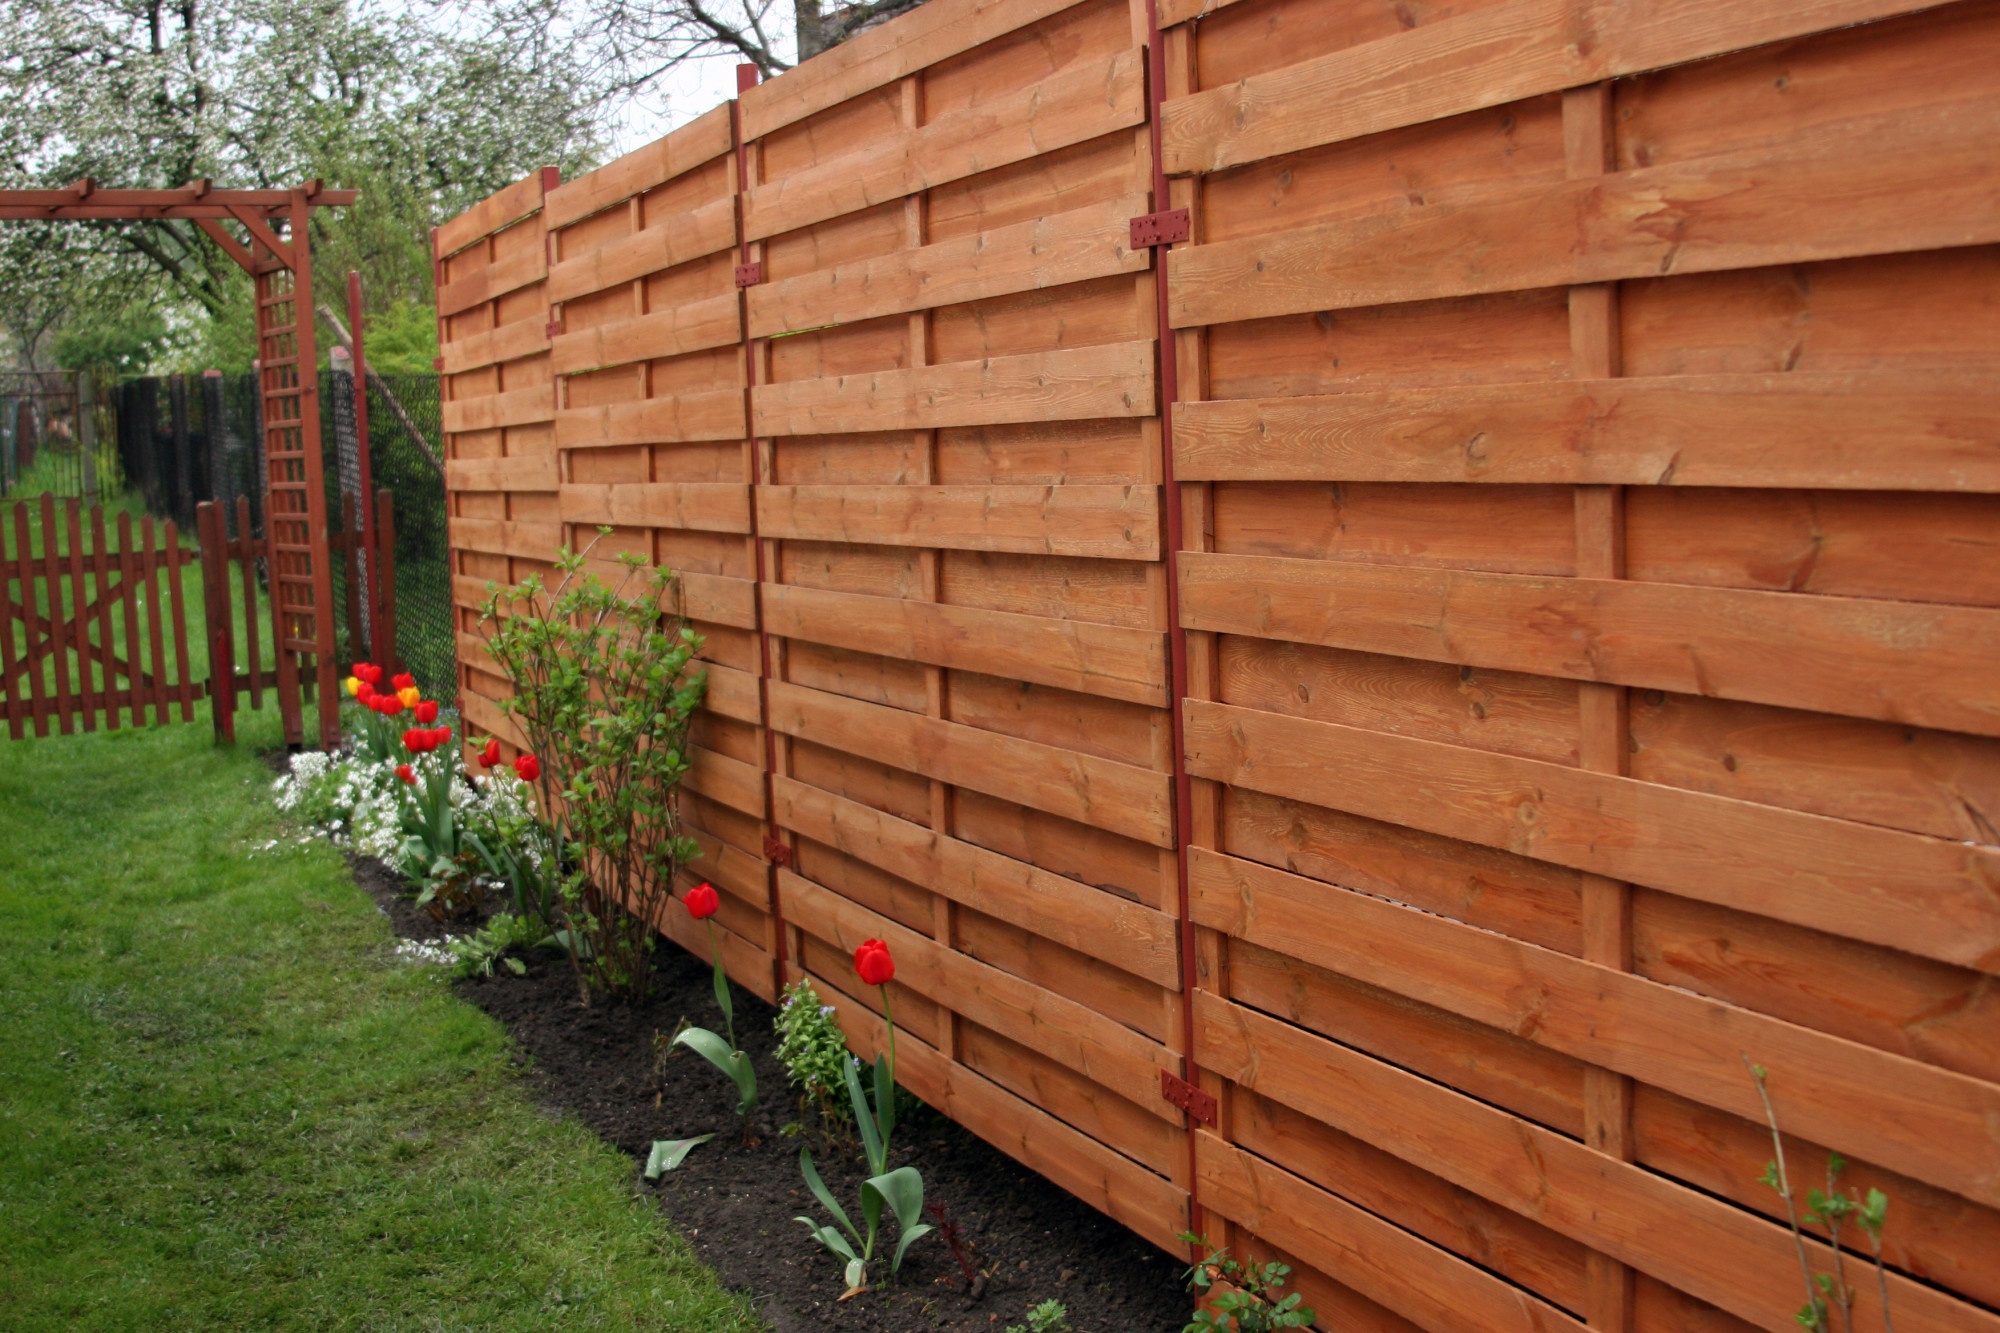 DIY Privacy Fences: Is It Better Left to the Pros?